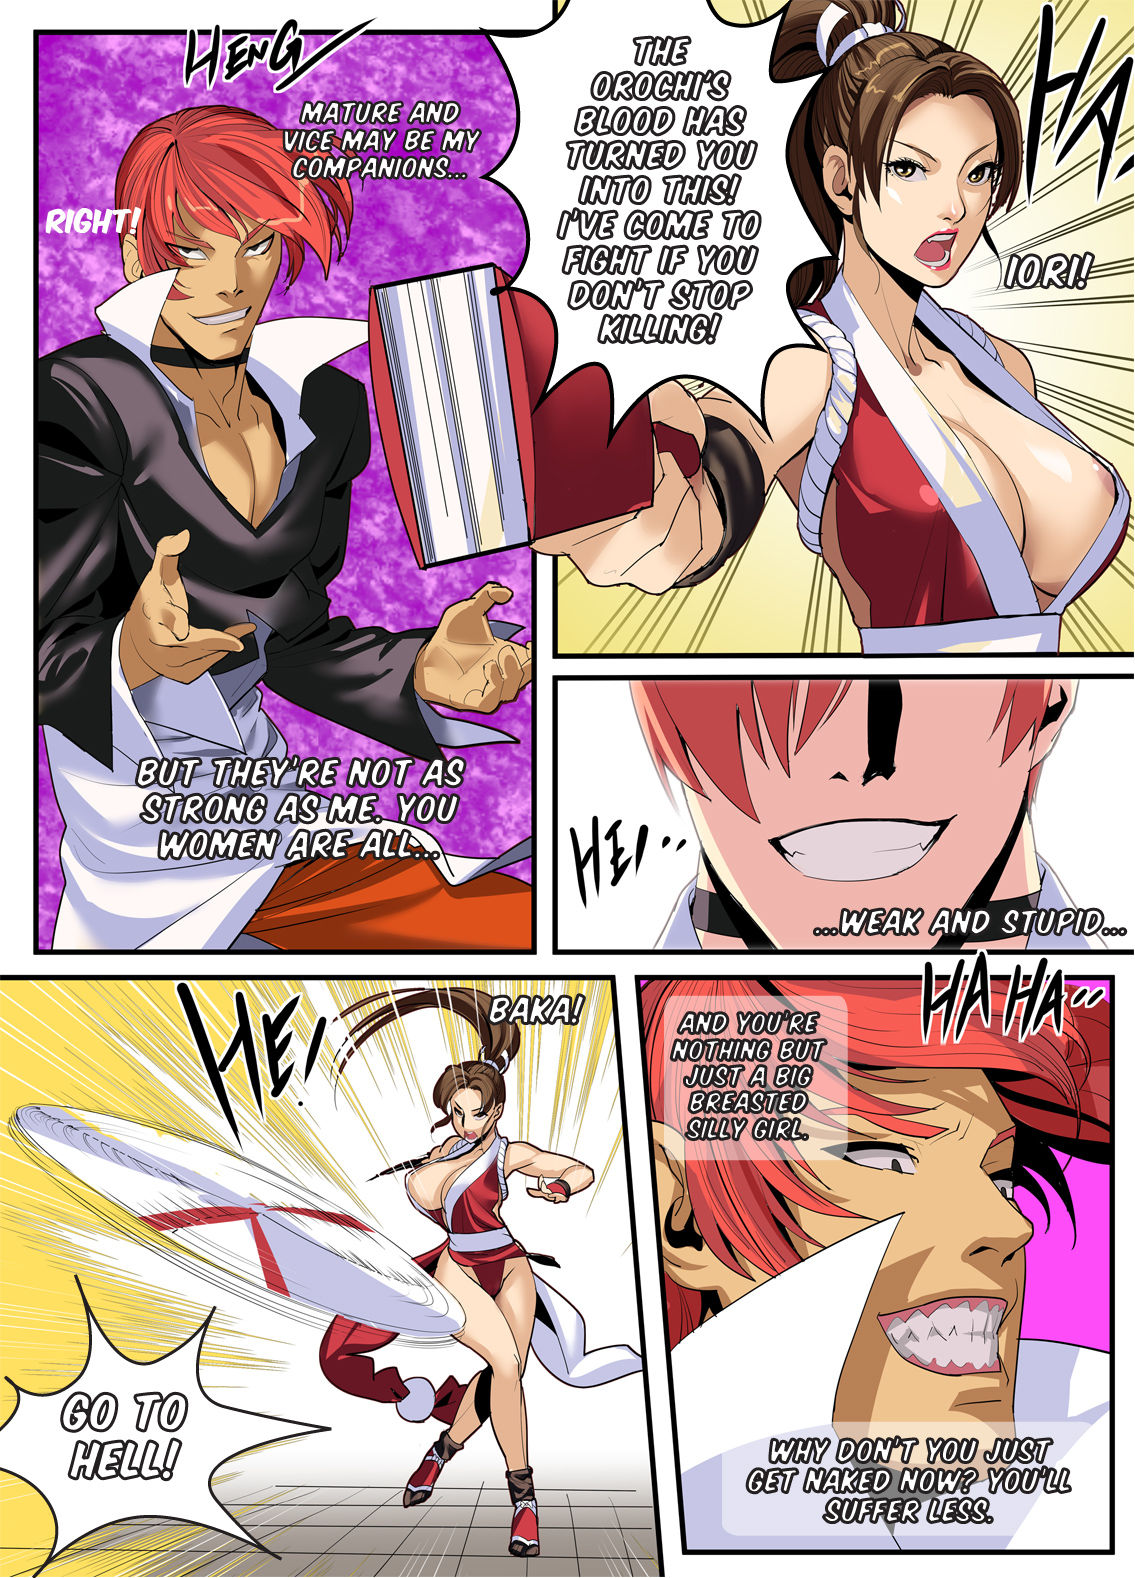 [chunlieater] The Lust of Mai Shiranui (King of Fighters) [English] [Yorkchoi & Twist] page 9 full